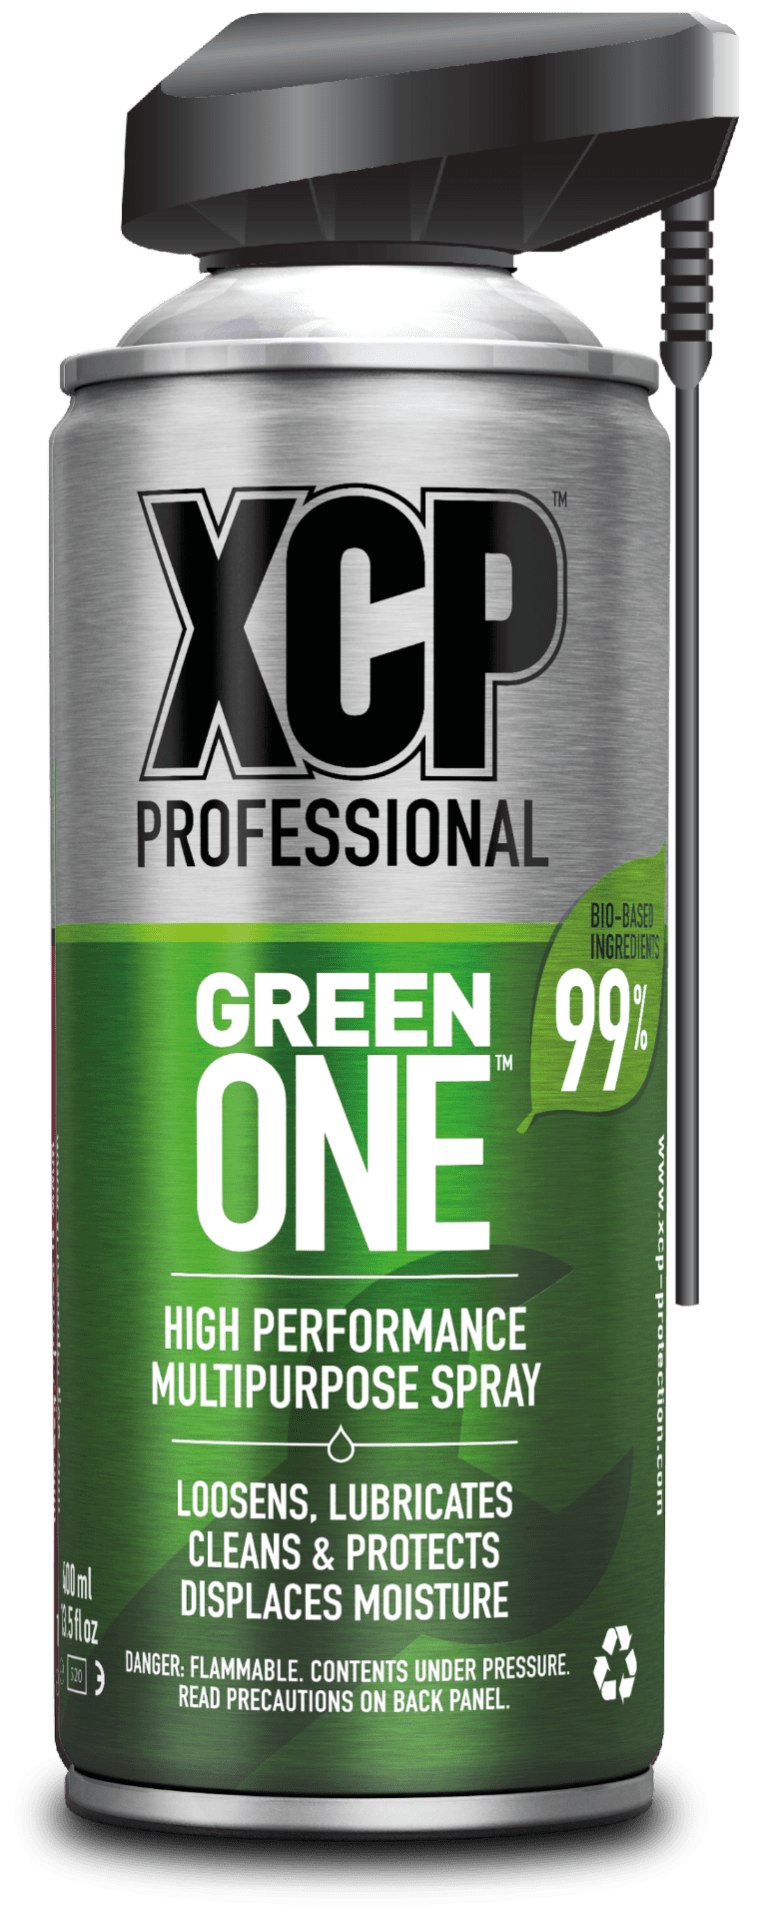 .com: XCP Professional - Lubricate and Protect - High